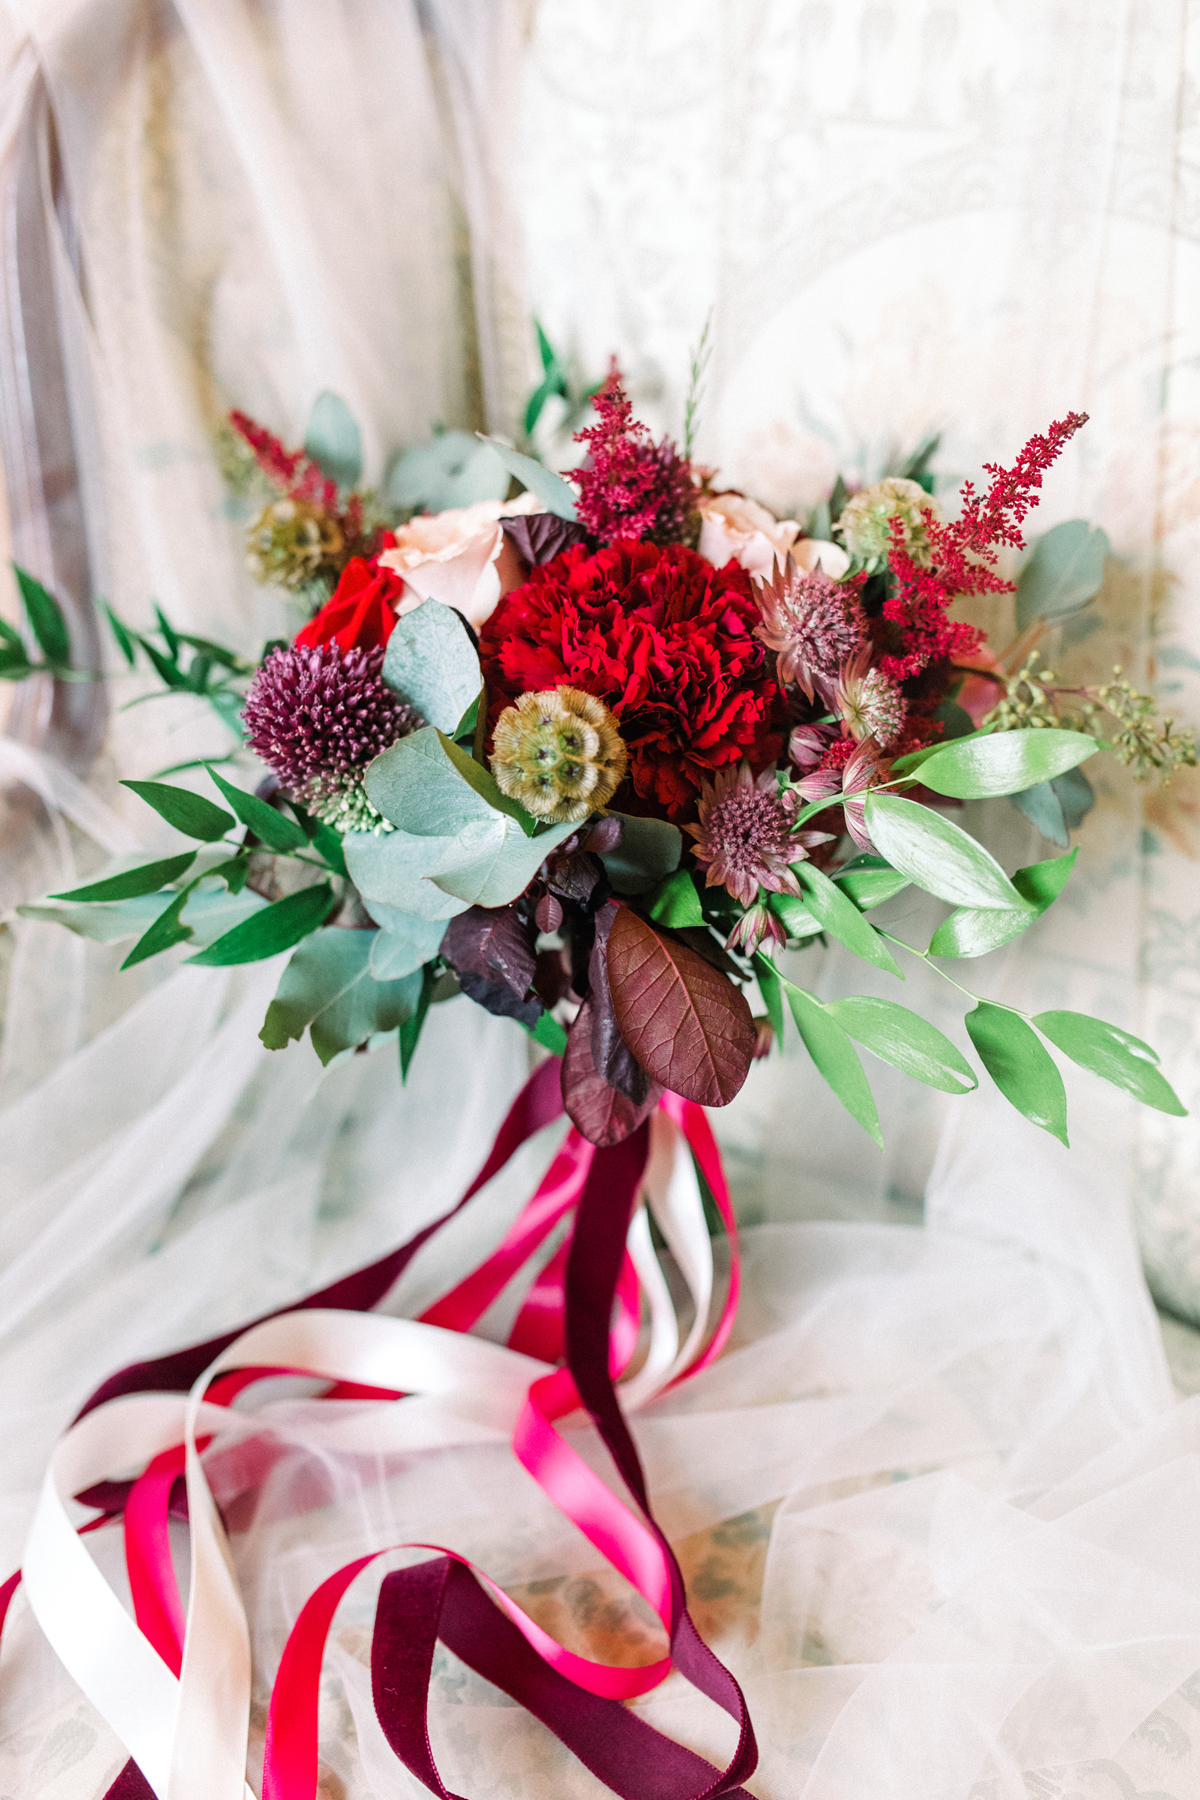 3 Bright read Autumn wedding bouquet with red and burgunday ribbons